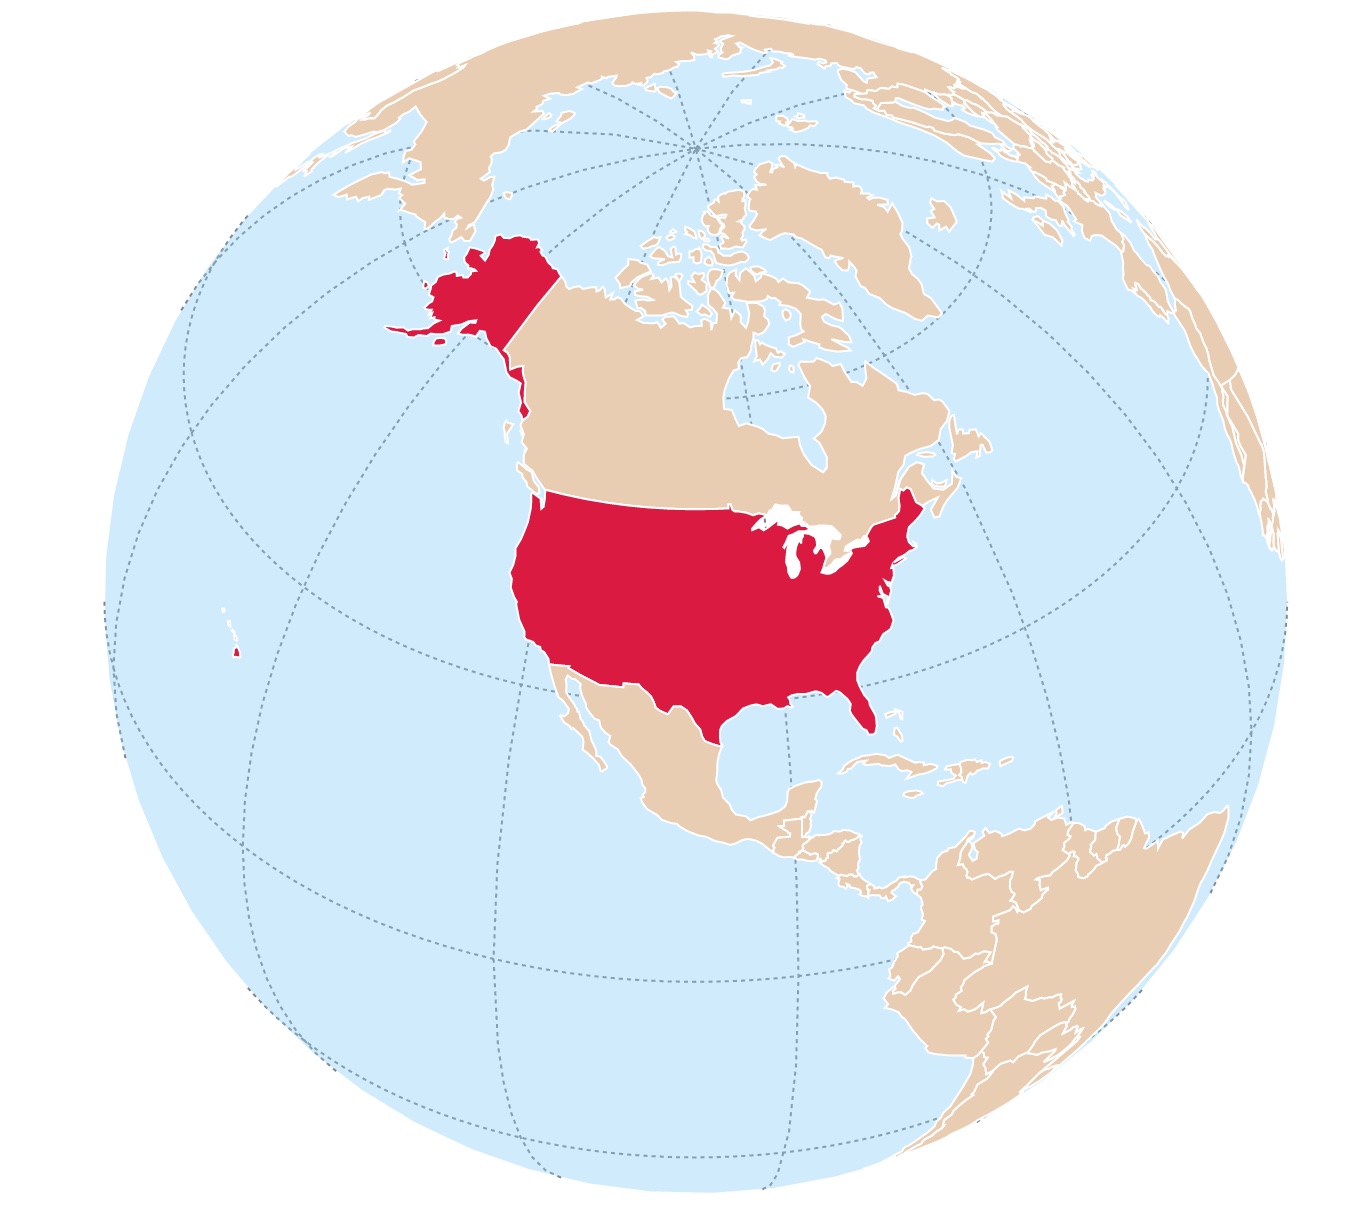 Location of the United States on the globe